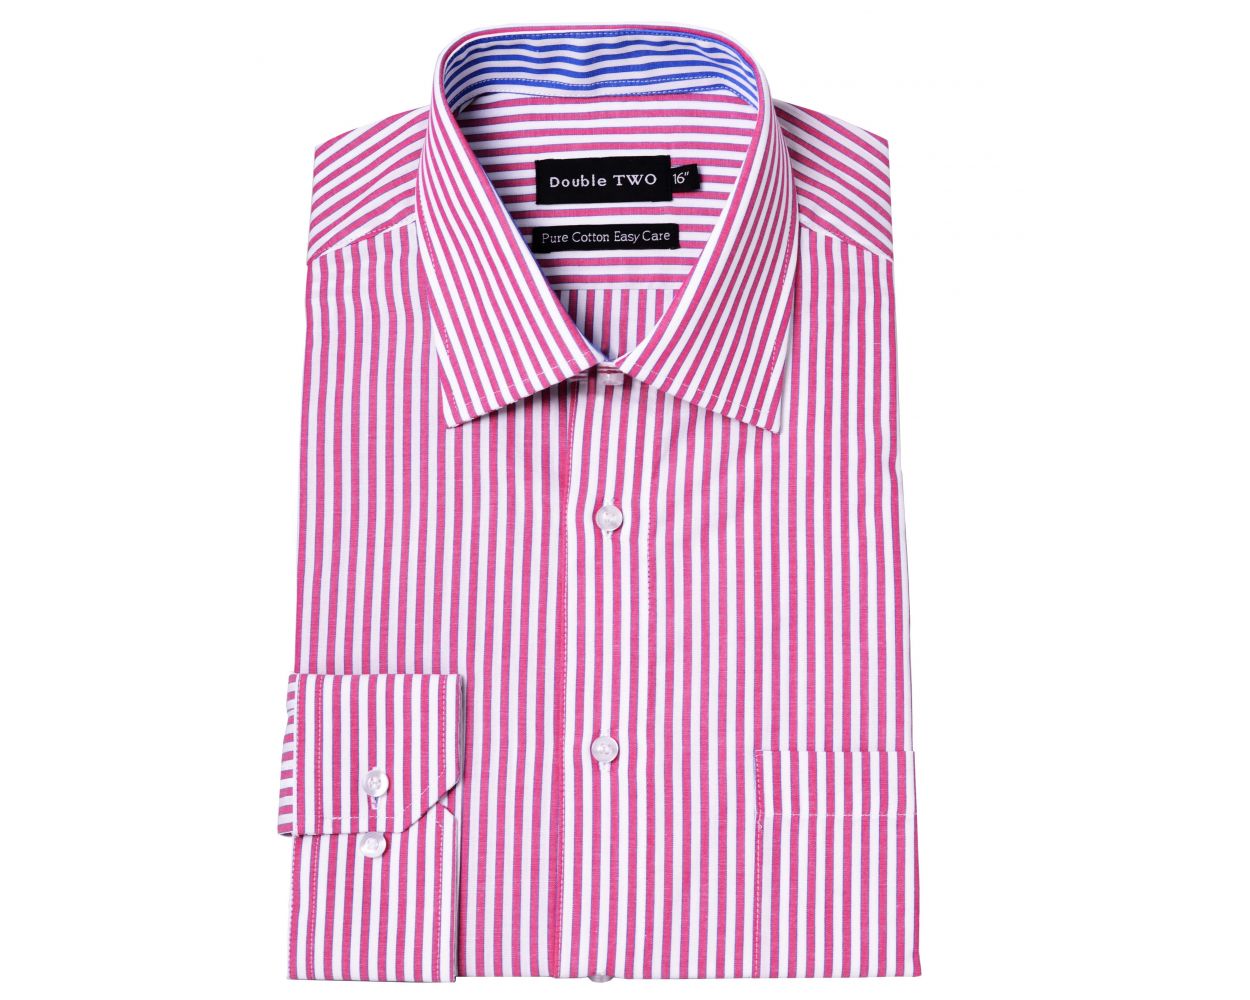 Men's Red and White Striped Tall Fit Formal Shirt | Double TWO